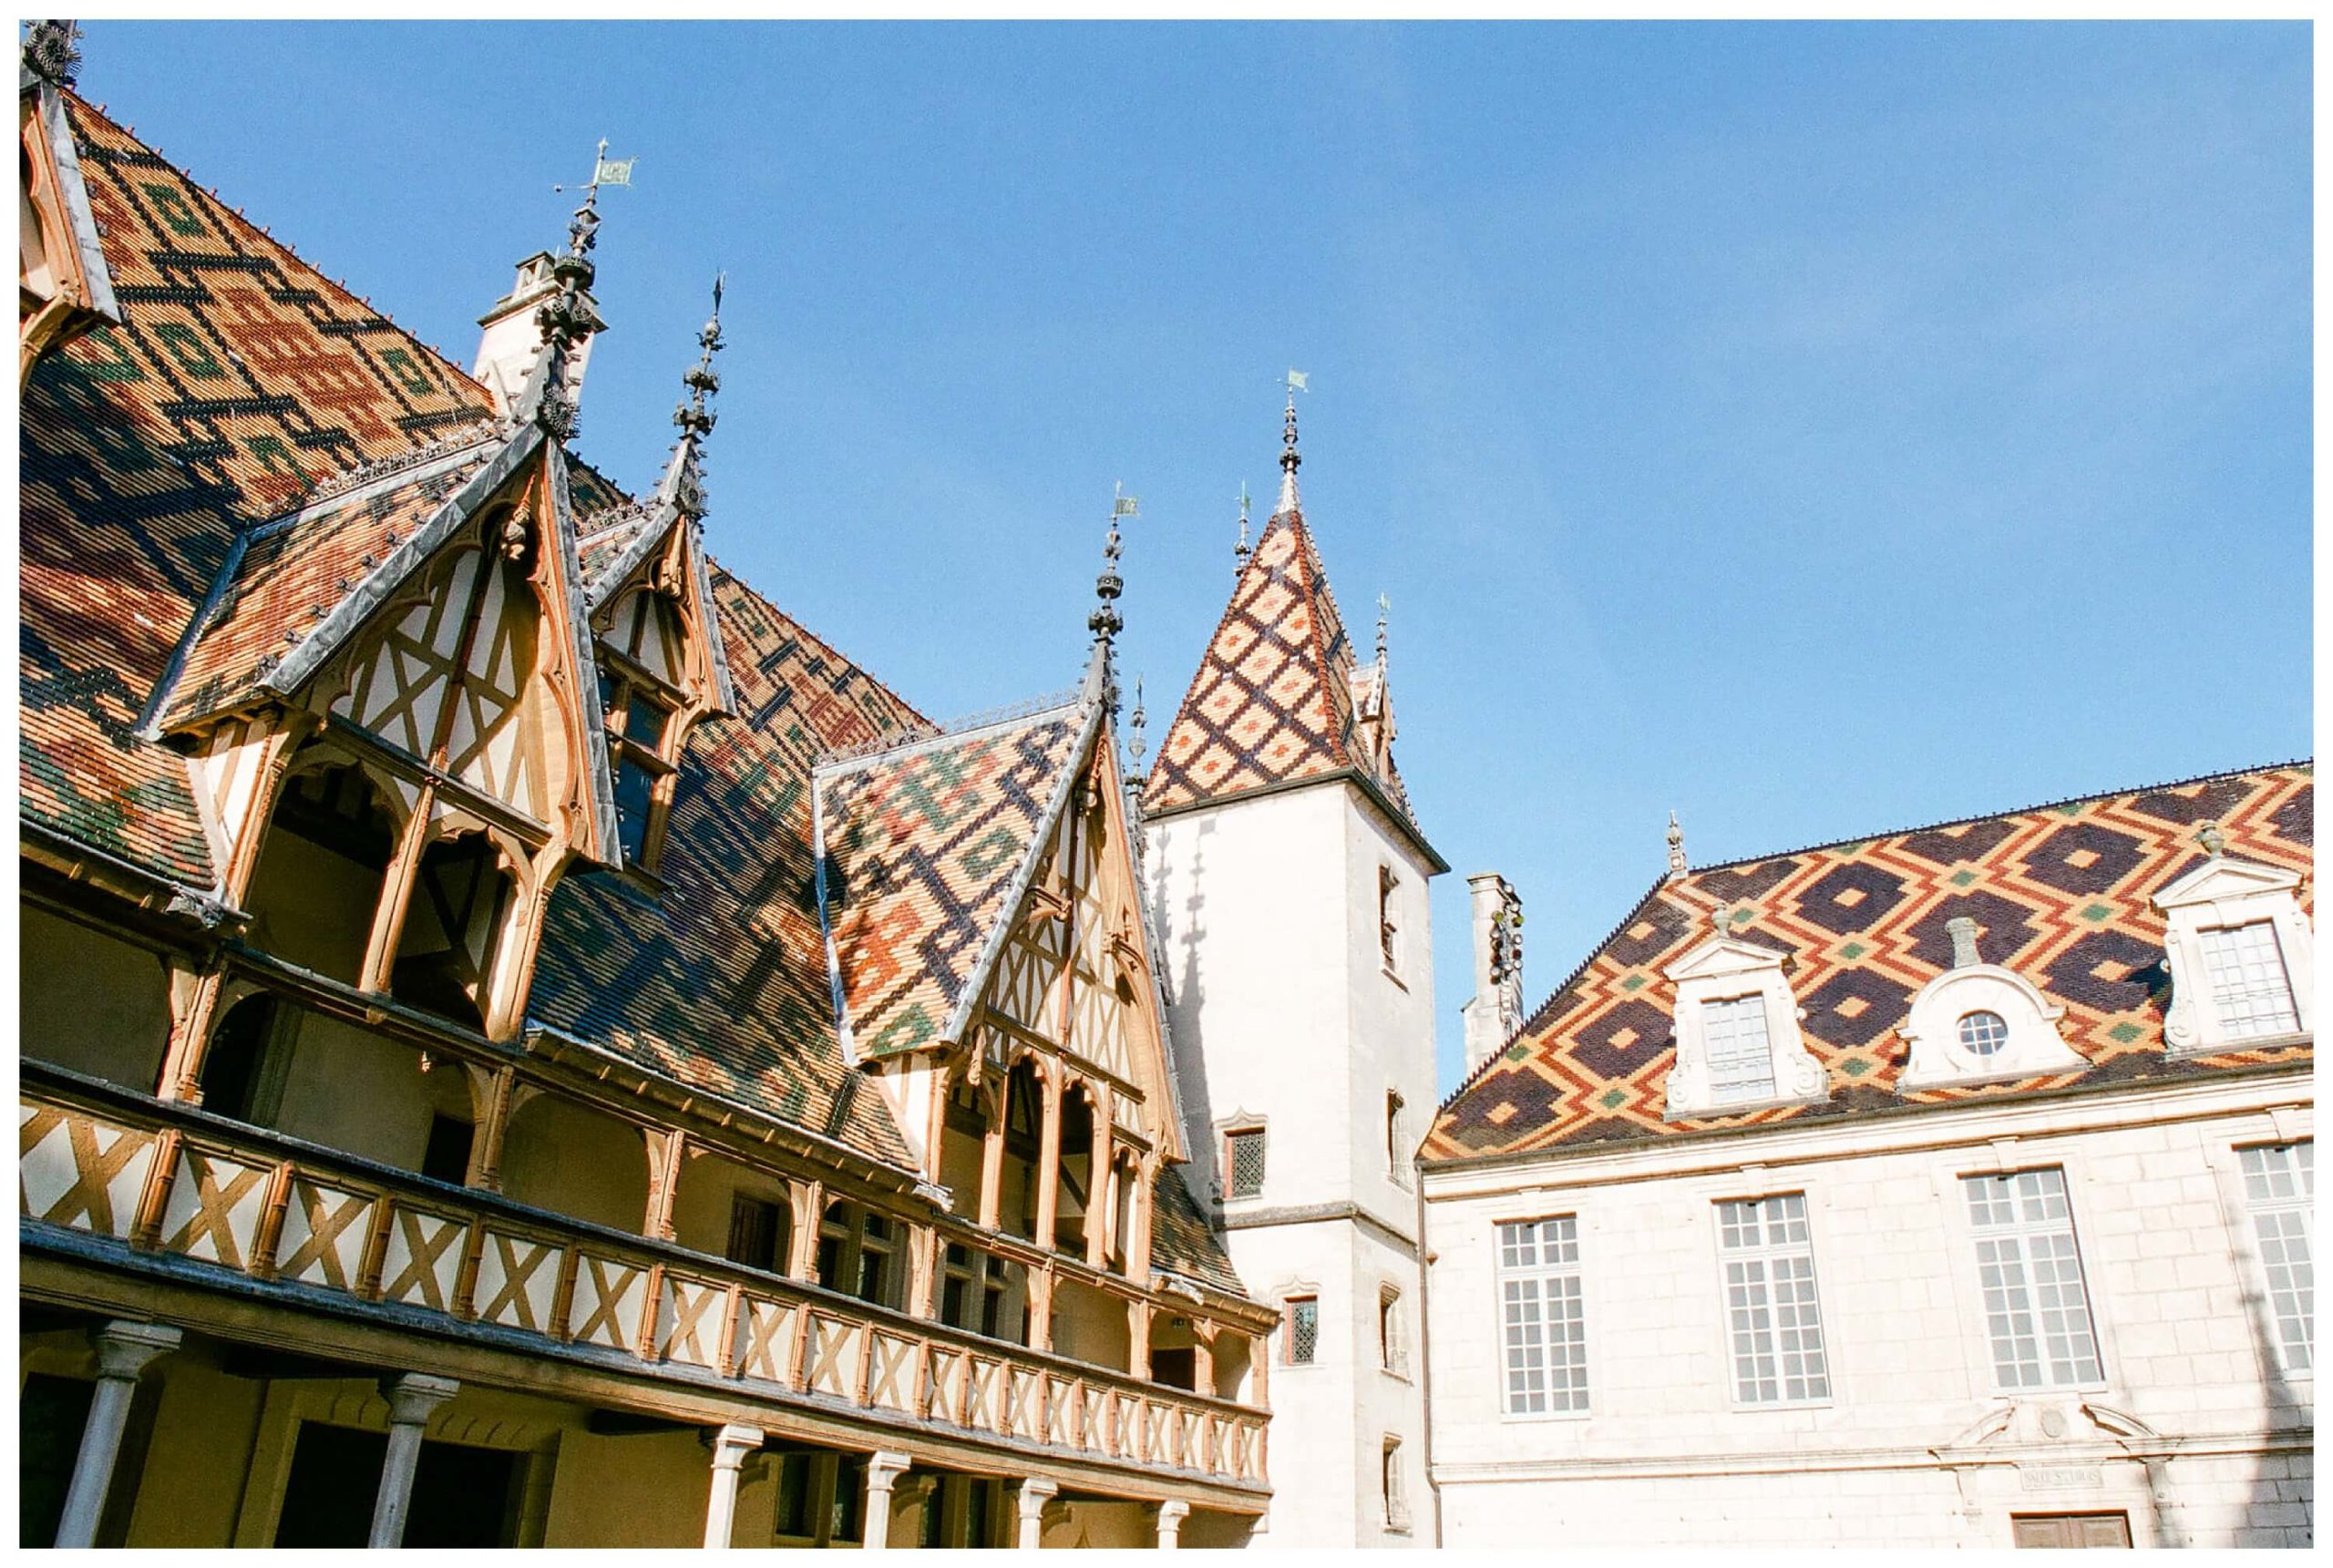 the famous tiled roofs of les hospices de beaune, france